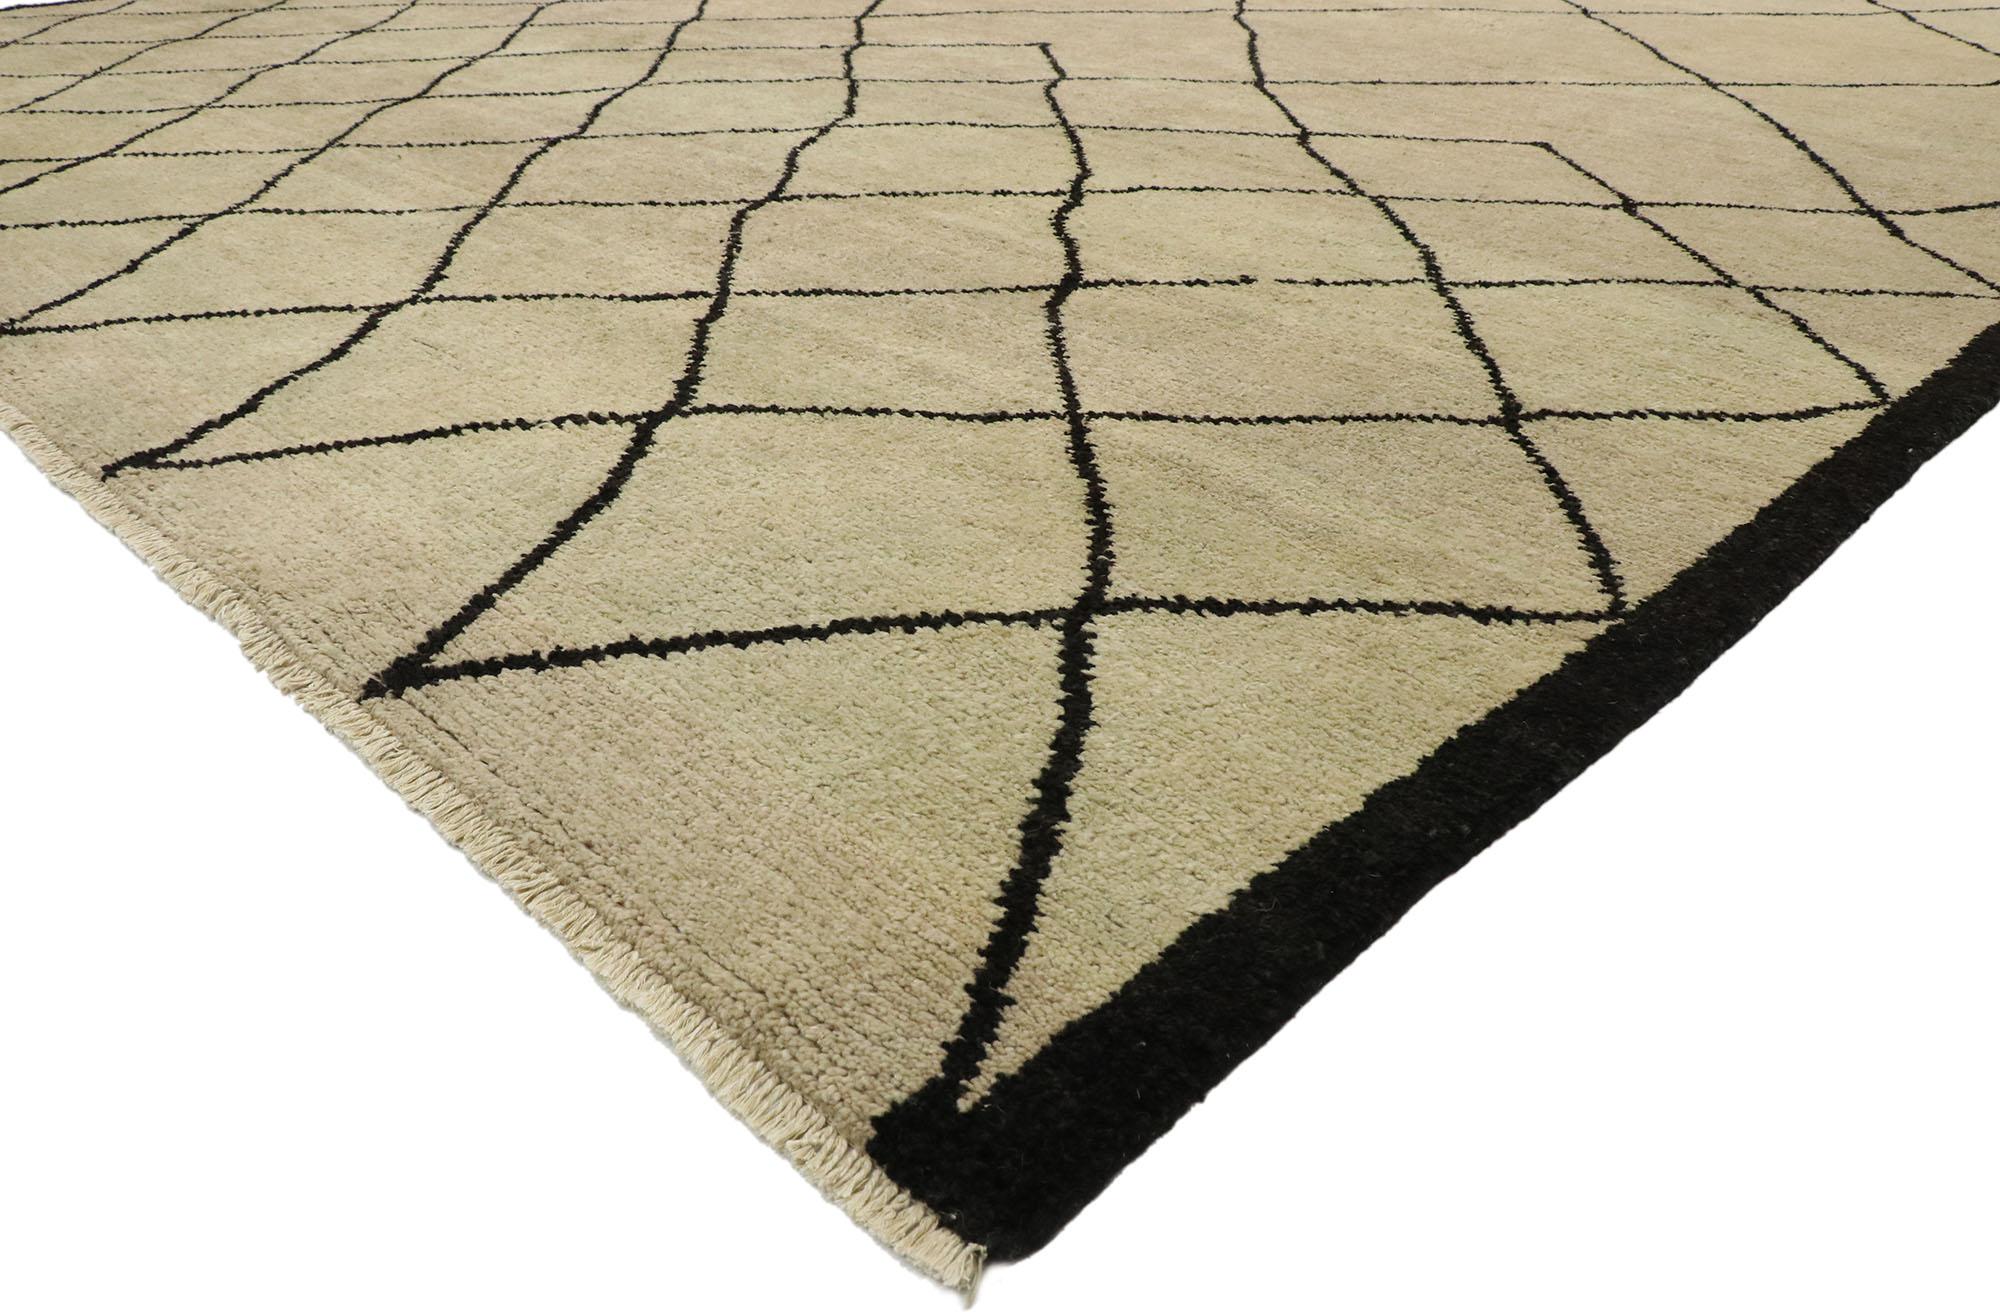 80465, new contemporary Moroccan rug with Mid-Century Modern style. Warm and inviting with cozy hygge vibes, this hand knotted wool contemporary Moroccan style rug features contrasting black lines running the length of the sandy-beige backdrop. The